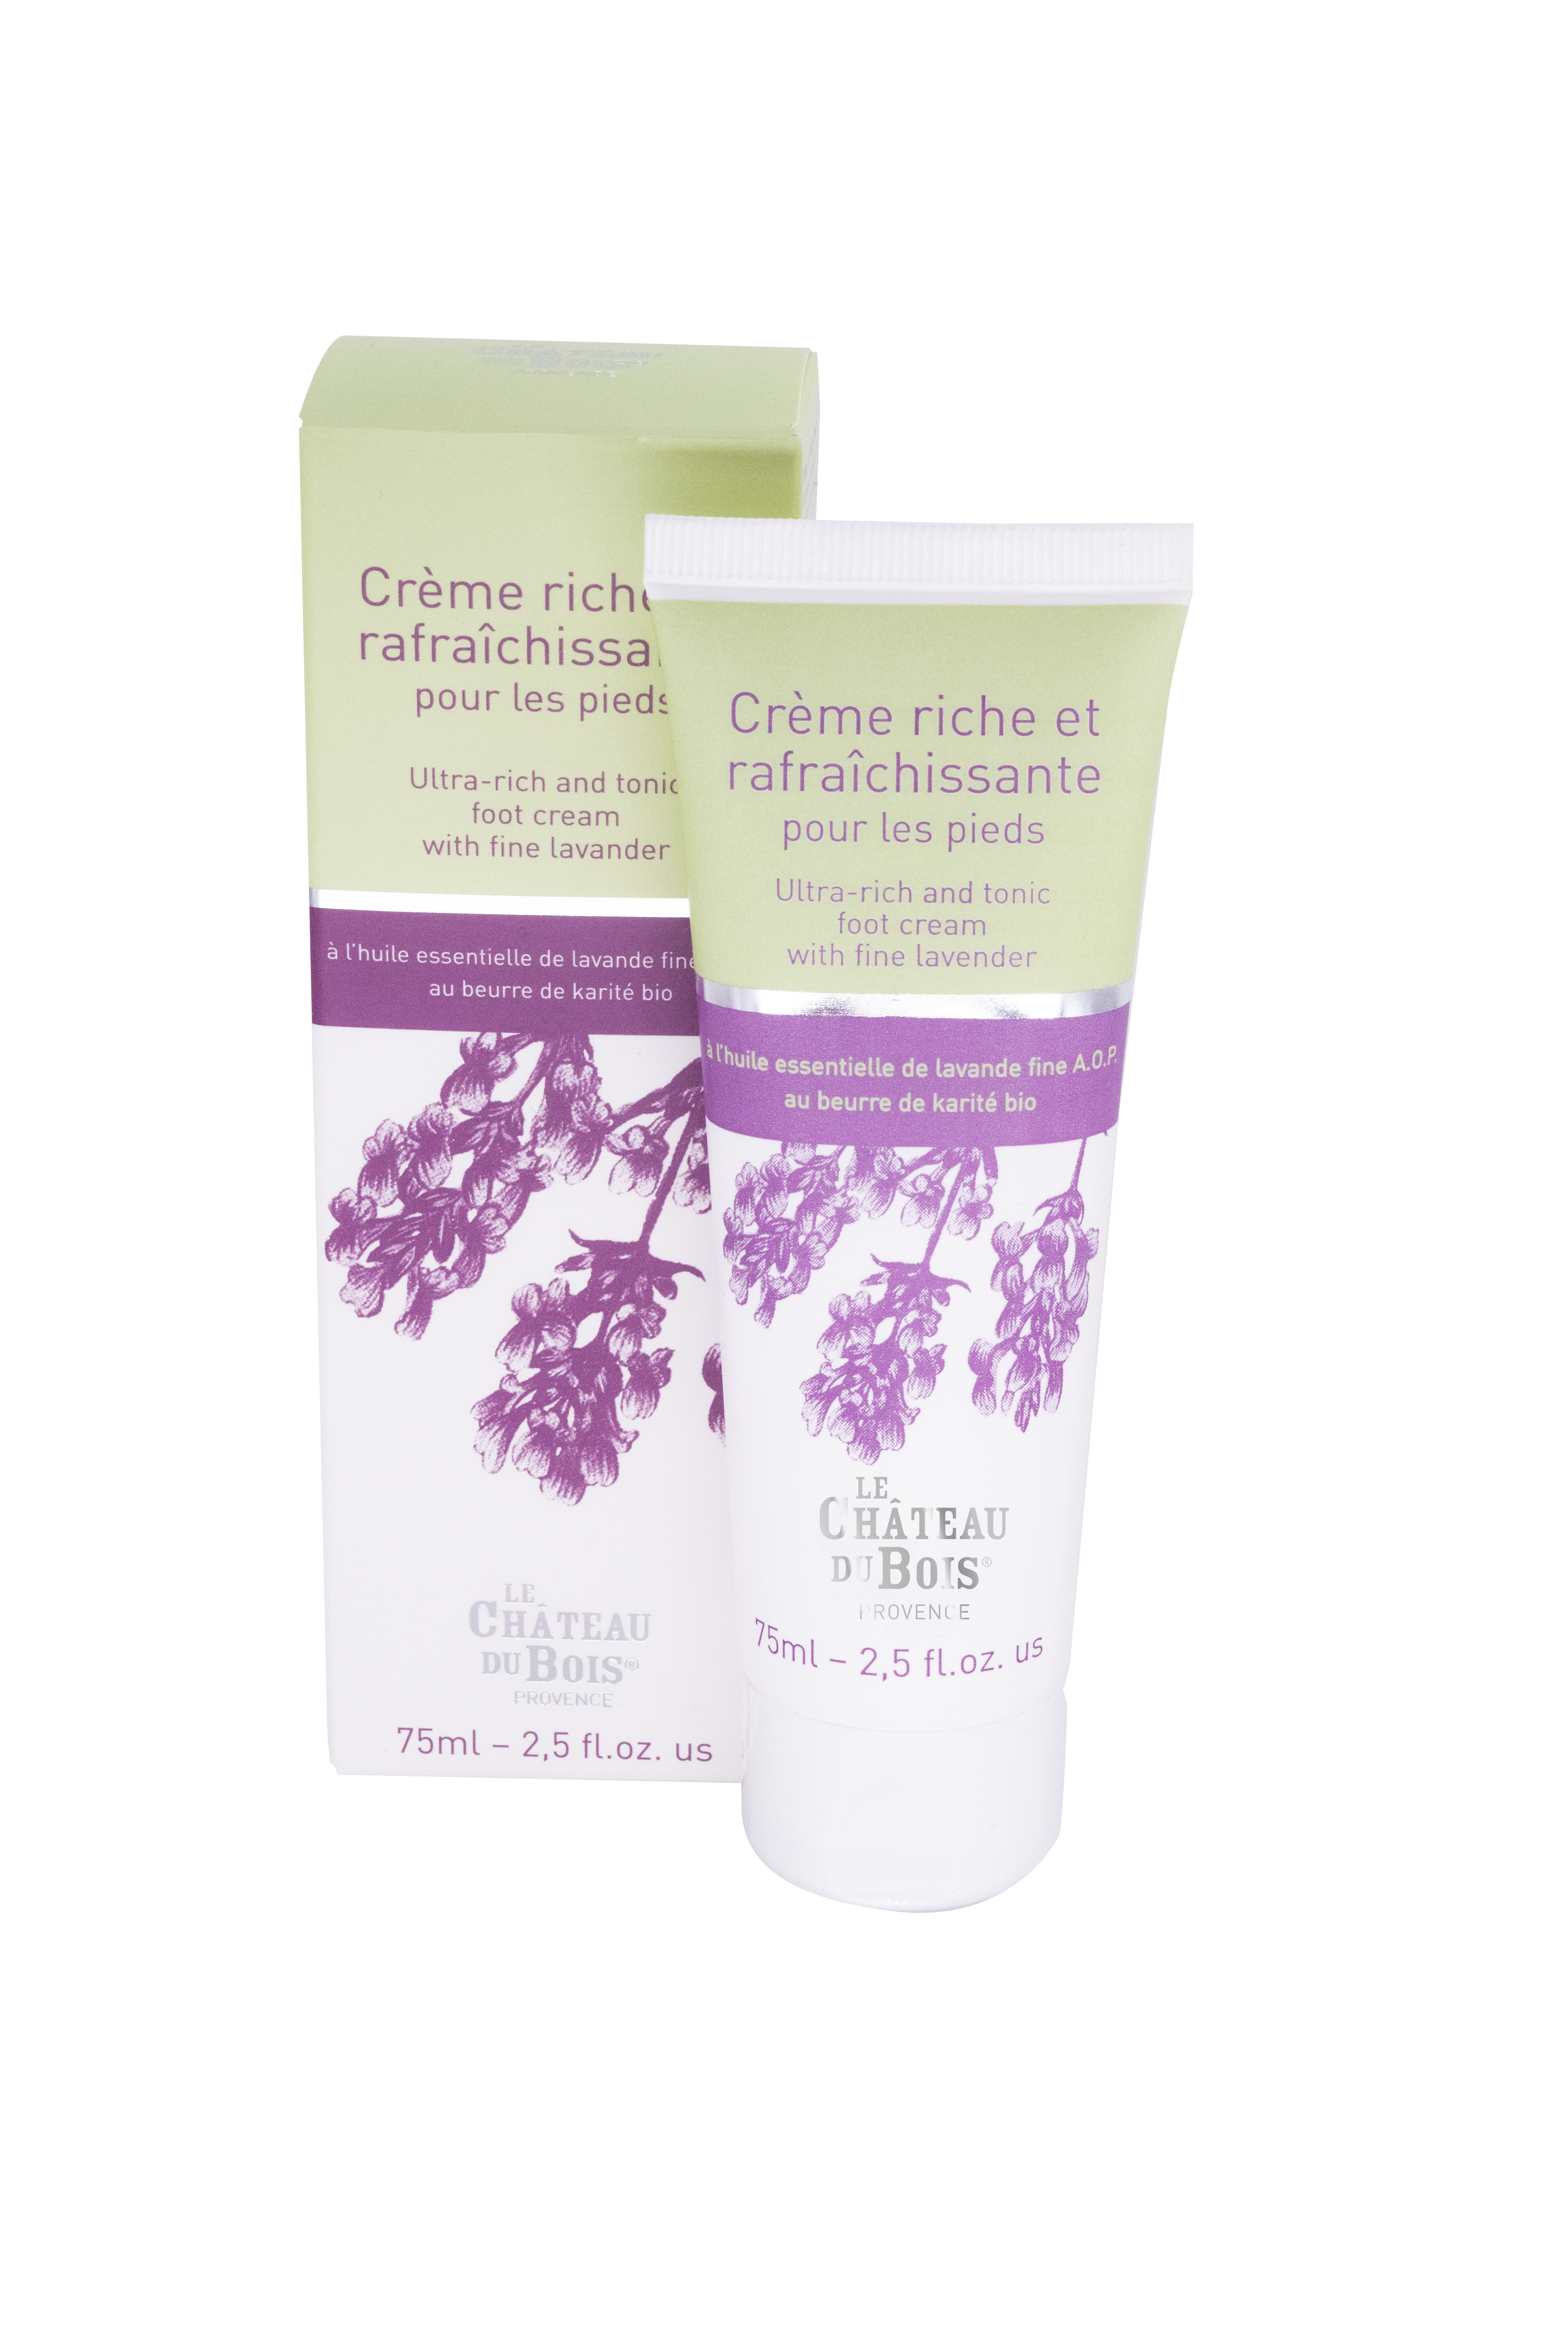 Ultra-rich and tonic foot cream with fine lavender - 2.5 fl. oz. us